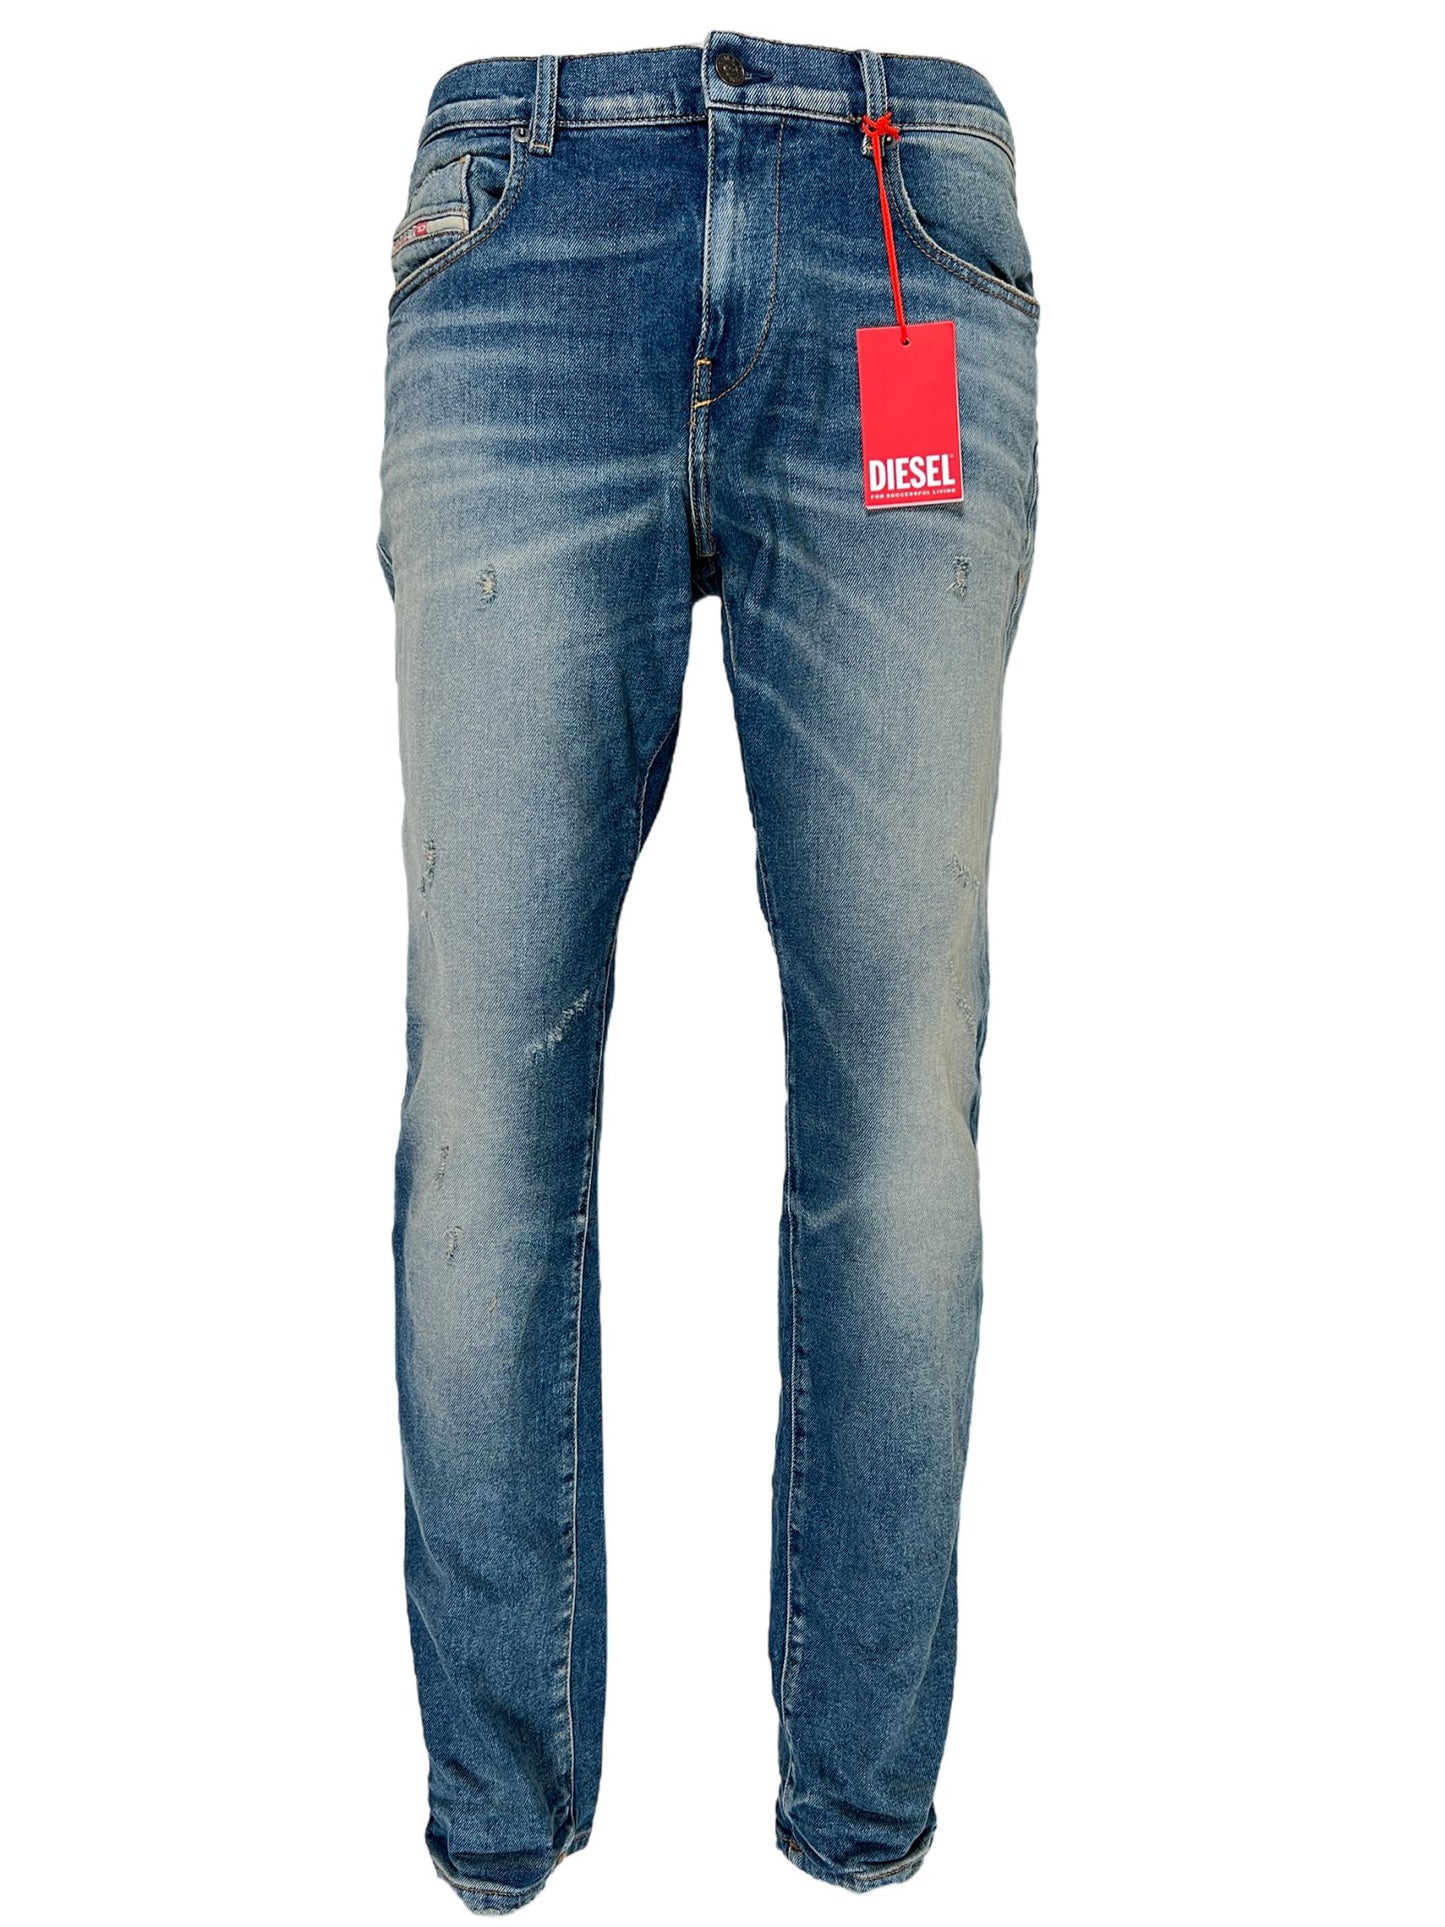 A pair of DIESEL 2019 D-STRUKT 9H55 DENIM slim fit jeans with a tag on them.